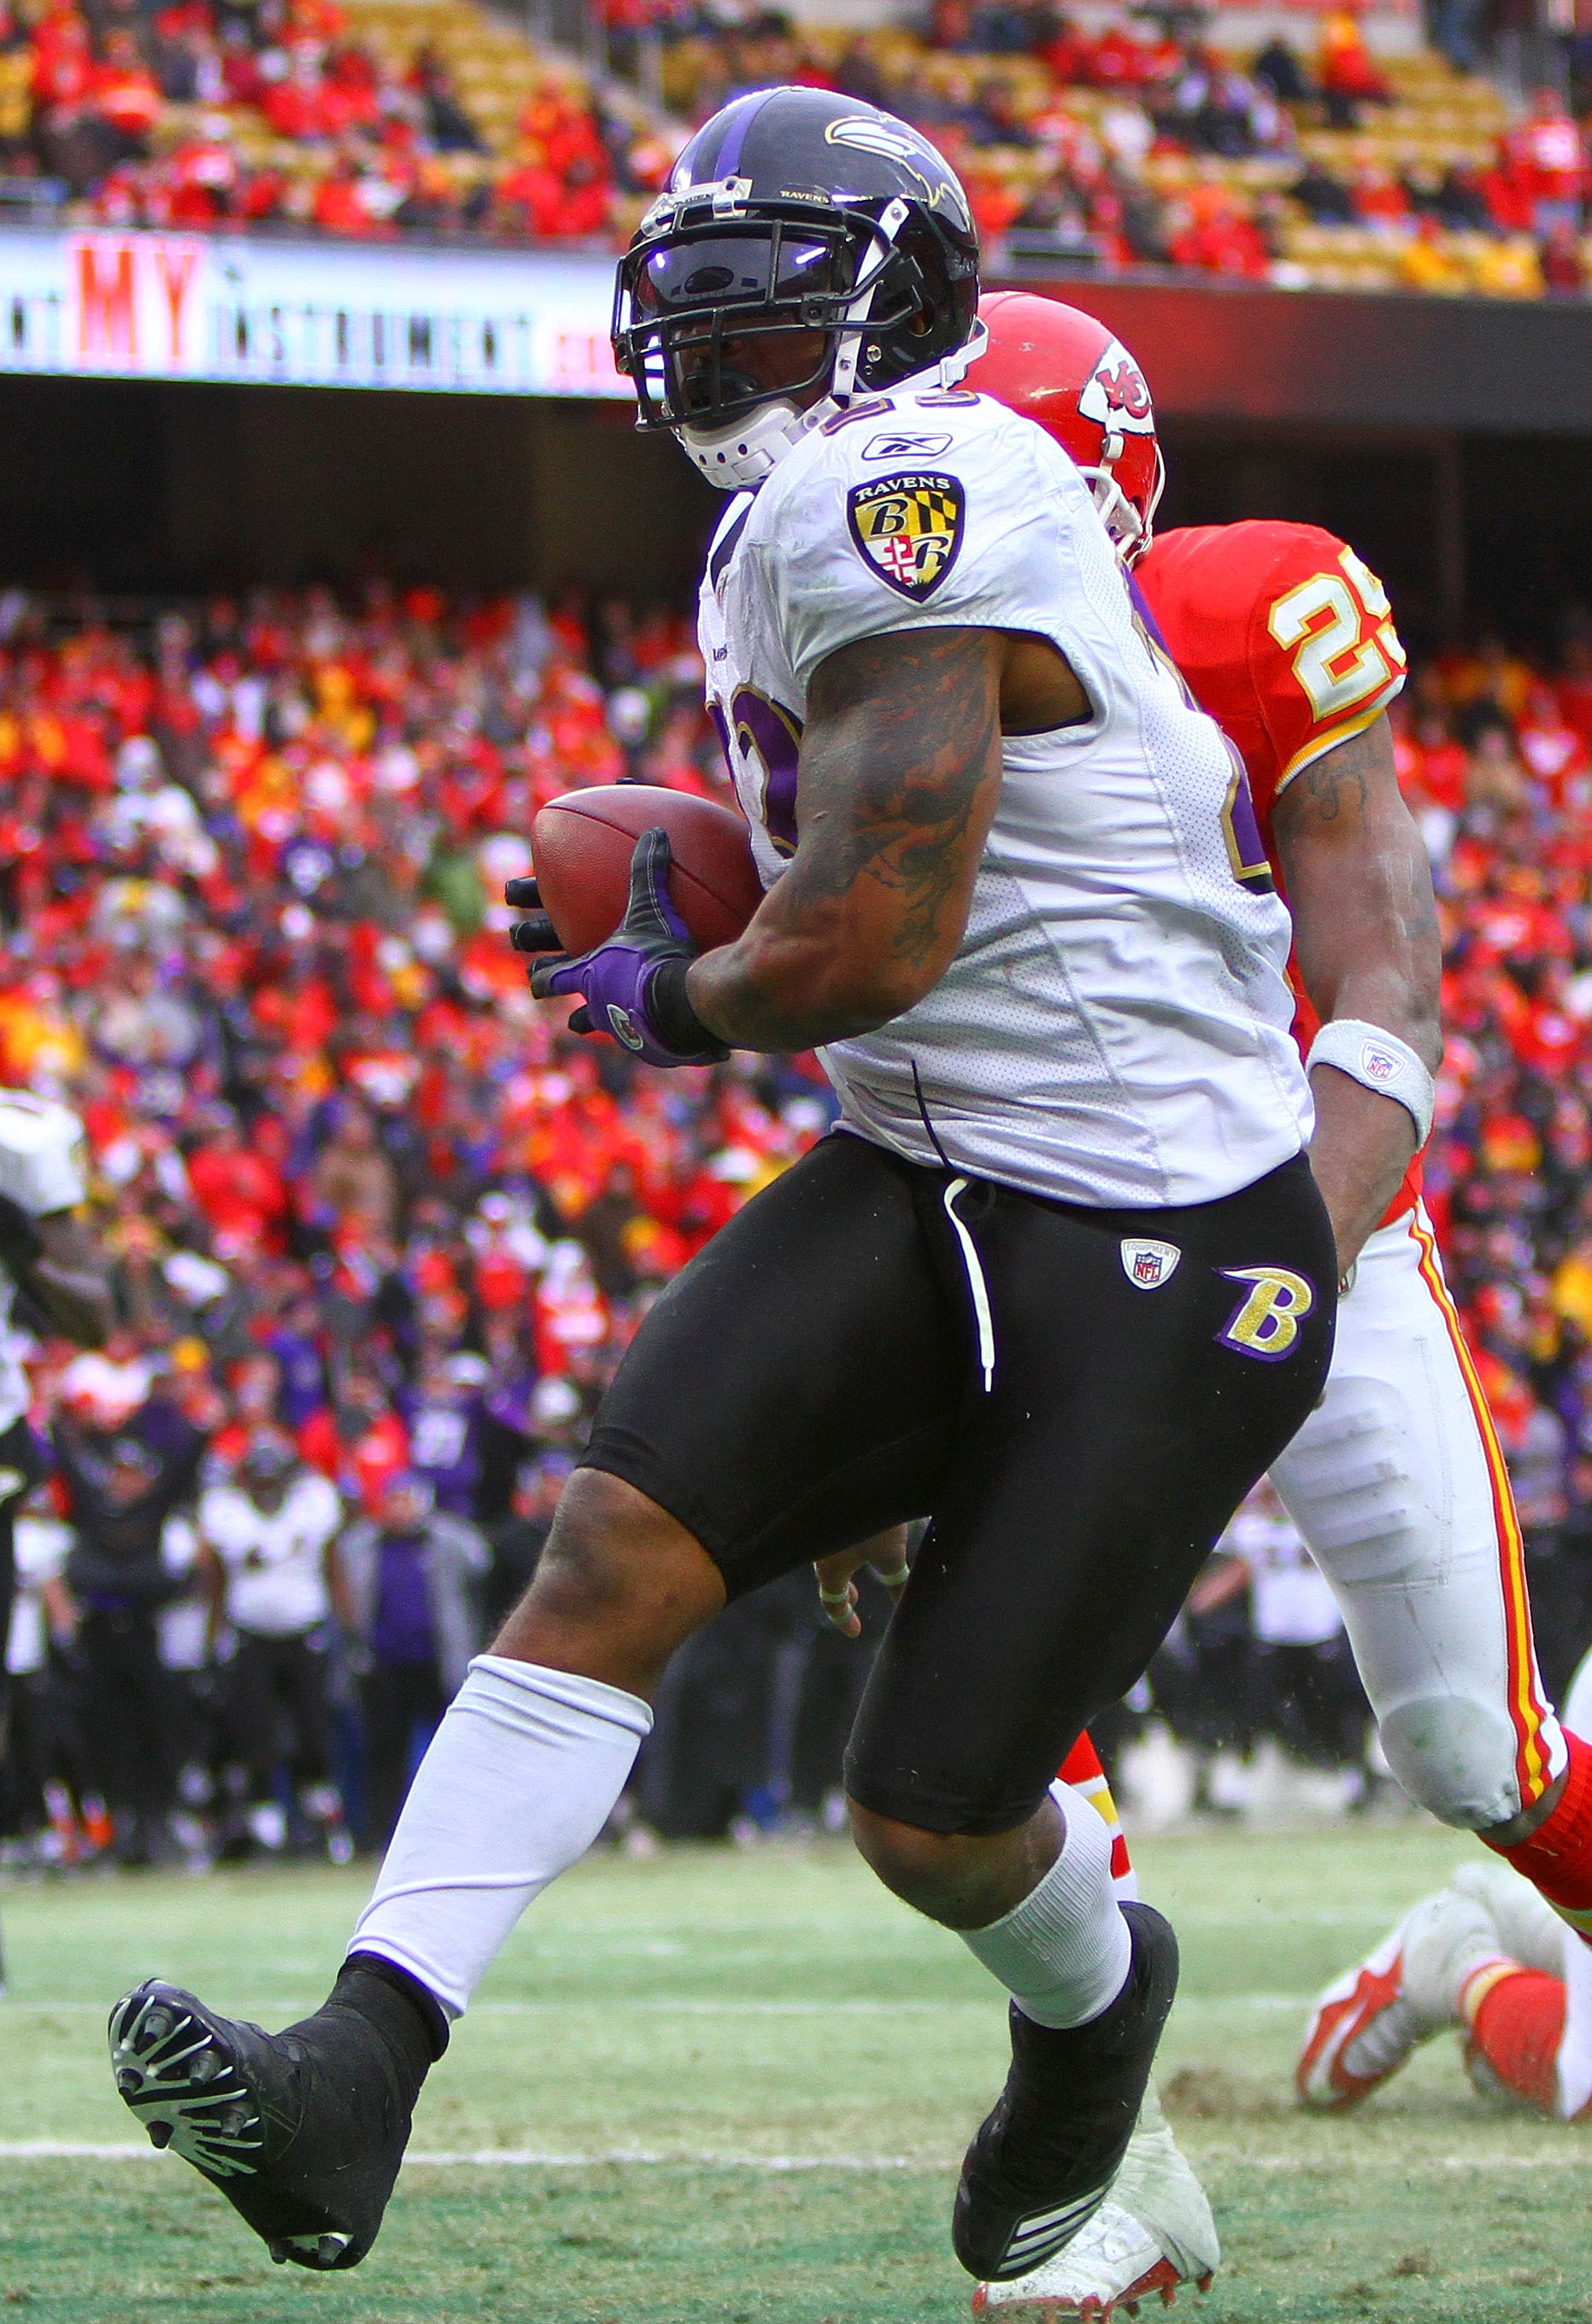 KANSAS CITY, MO - JANUARY 09:  Running back Willis McGahee #23 of the Baltimore Ravens scores a touchdown in the fourth quarter of the 2011 AFC wild card playoff game against the Kansas City Chiefs at Arrowhead Stadium on January 9, 2011 in Kansas City, M